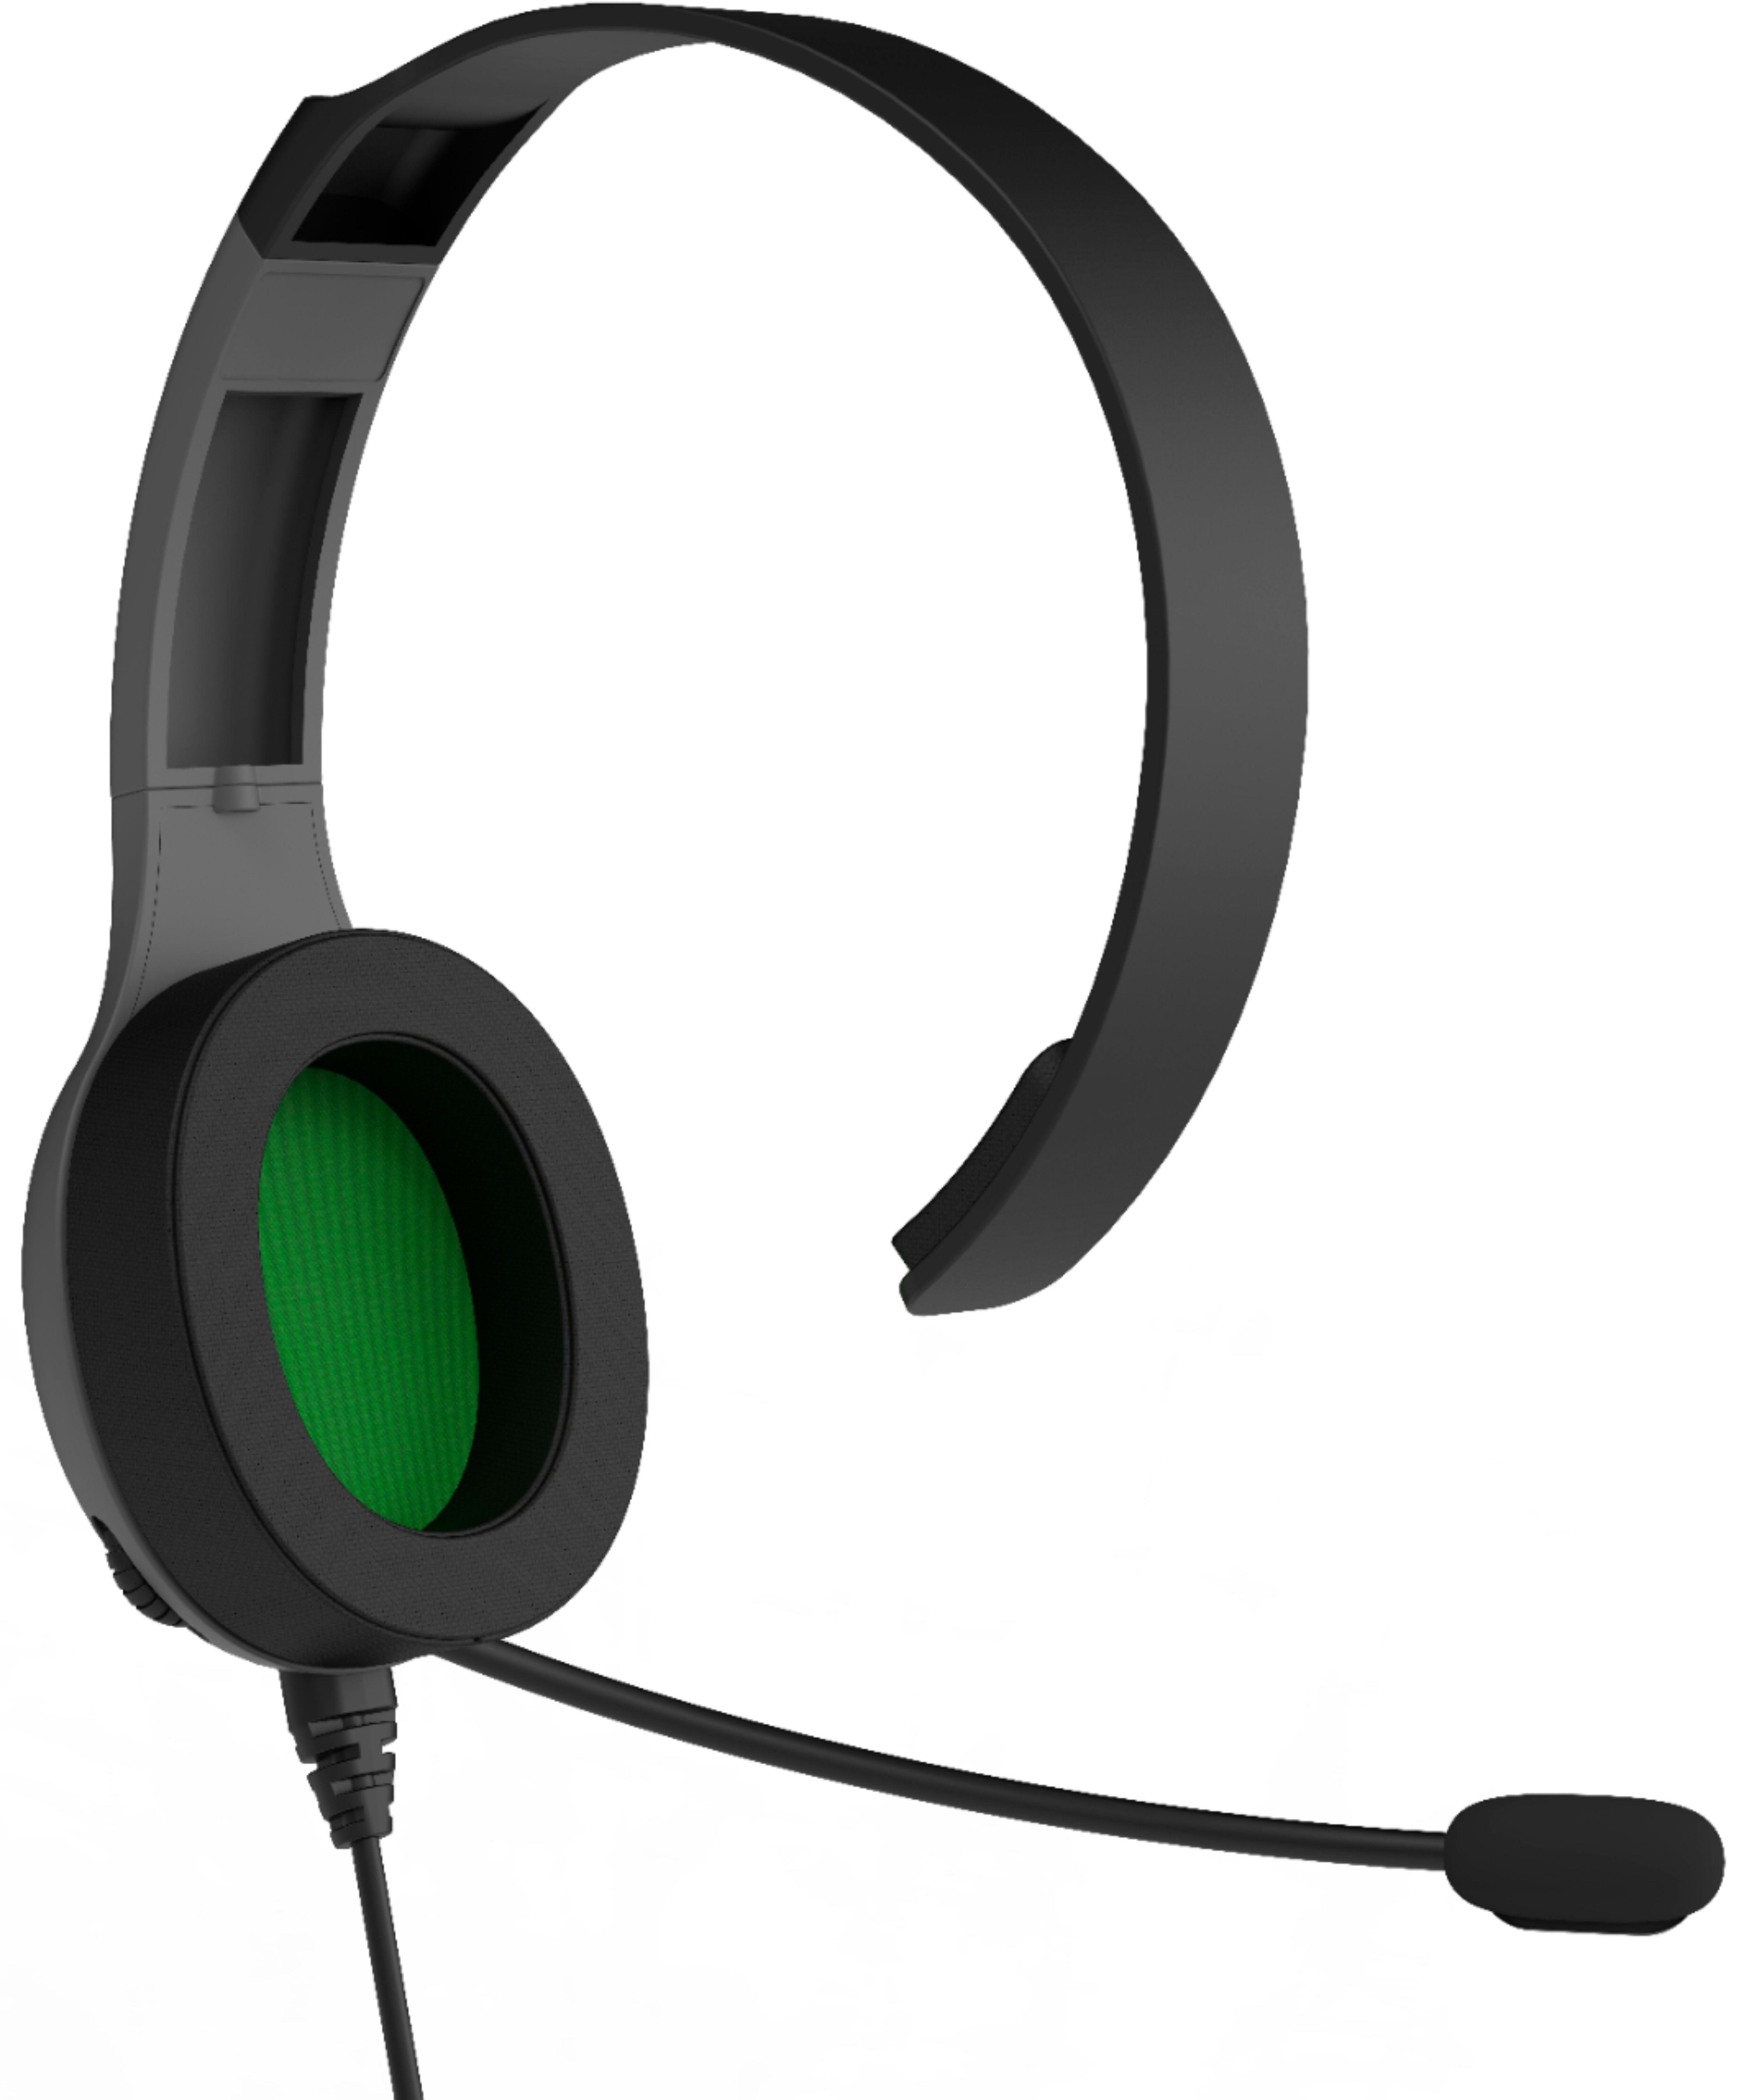 Afterglow - Lvl 30 Wired Mono Gaming Headset for Xbox One - Gray